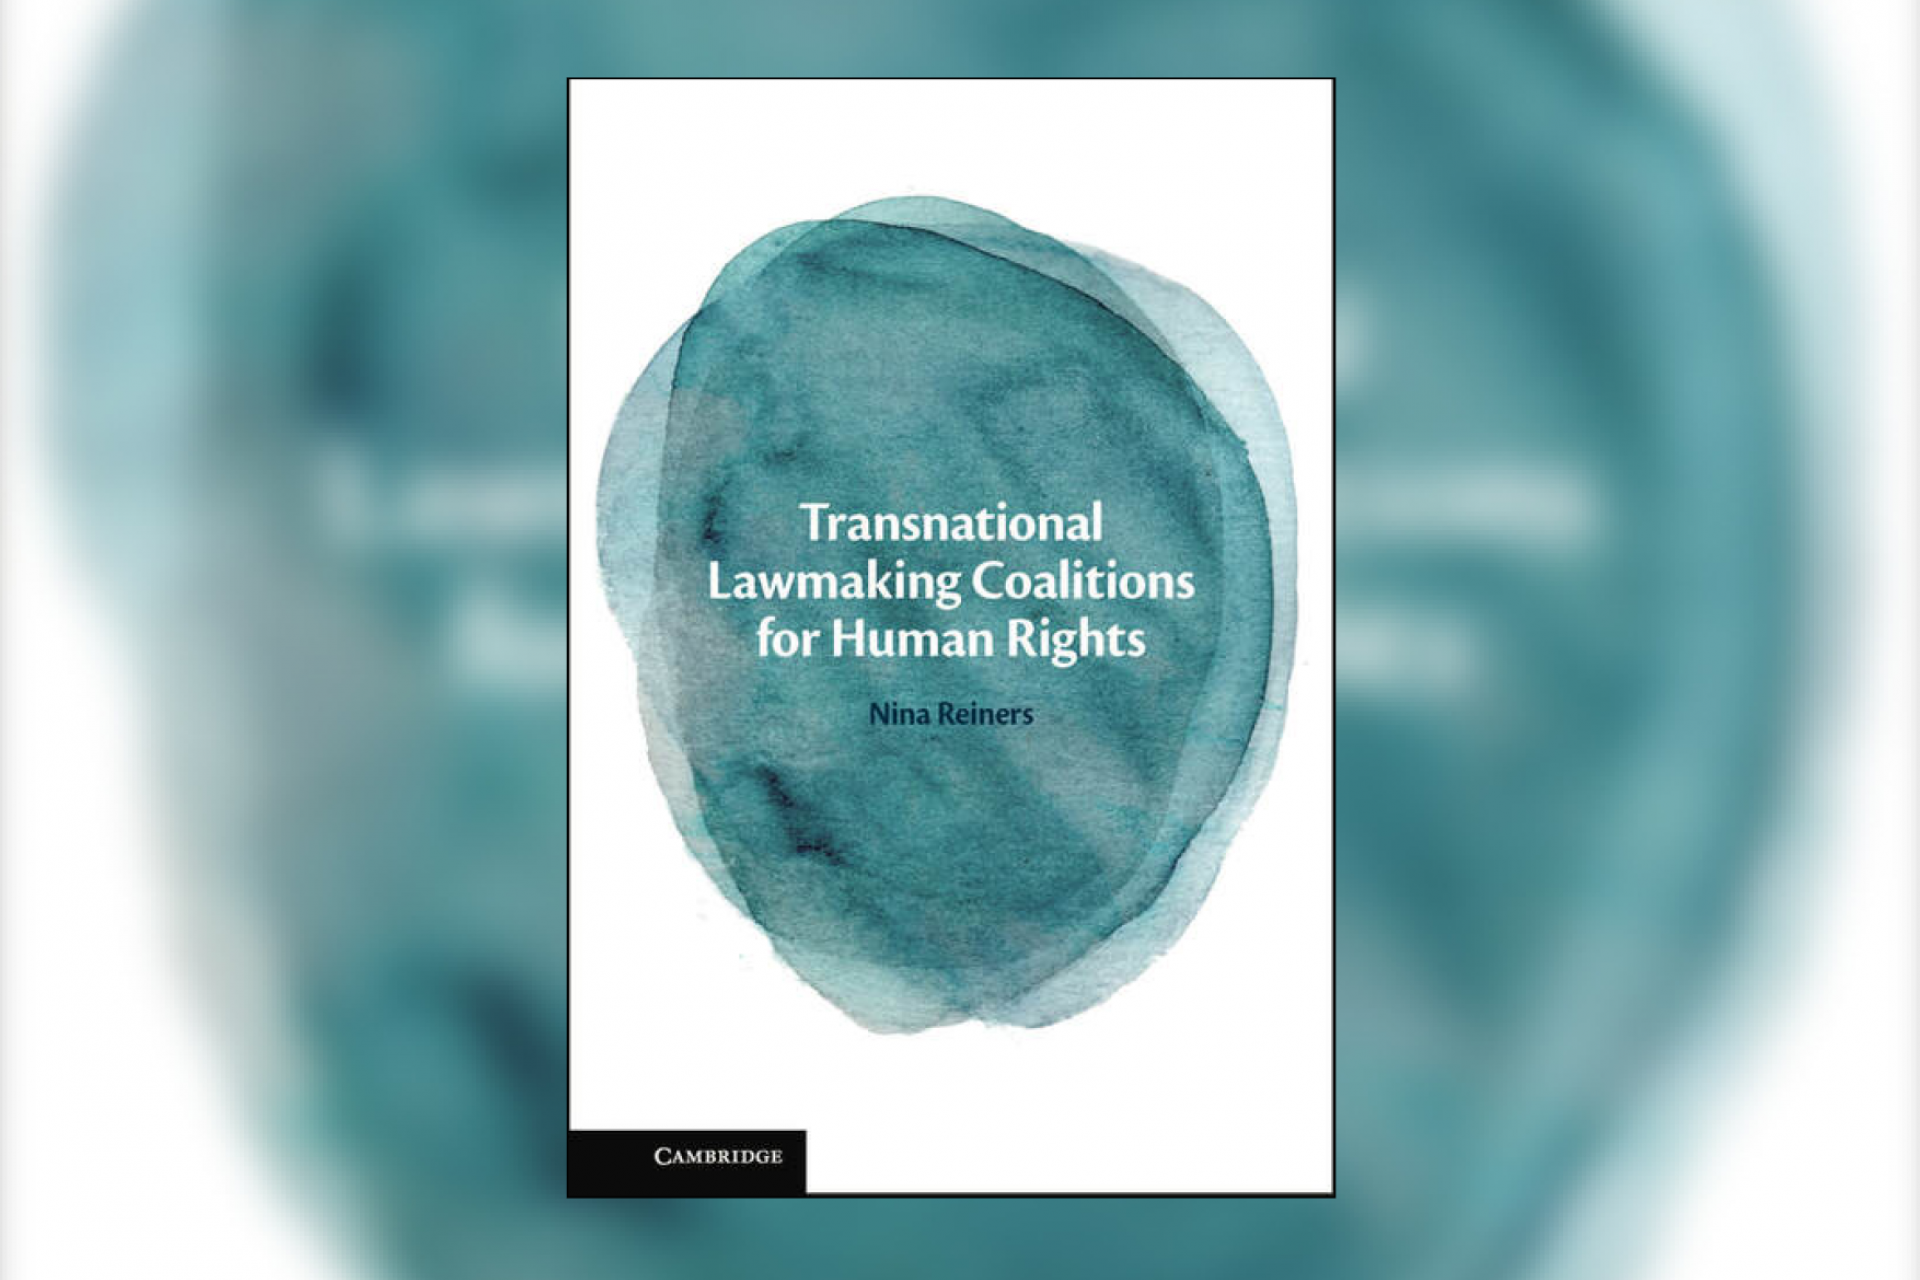 Book Launch: Transnational Lawmaking Coalitions for Human Rights